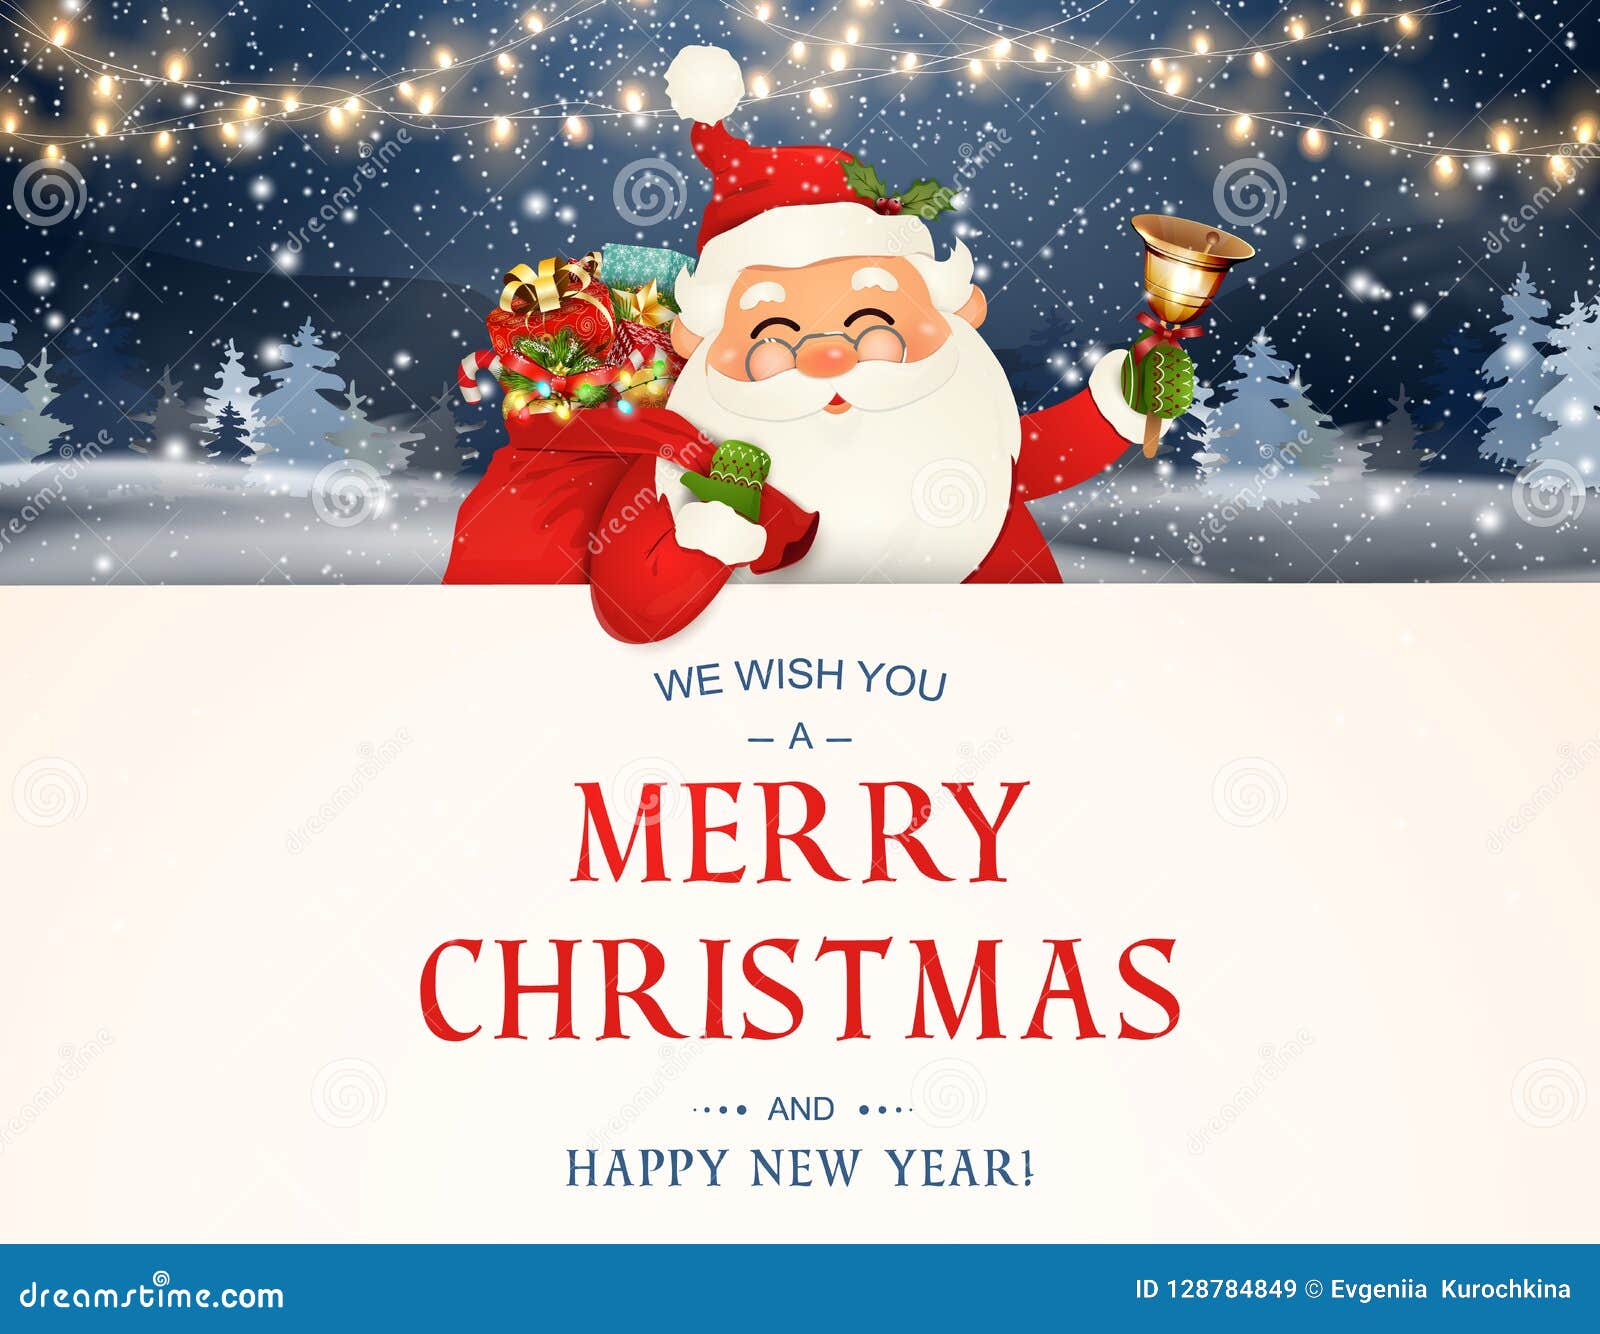 we wish you a merry christmas. happy new year. santa claus character with big signboard. merry santa clause with jingle